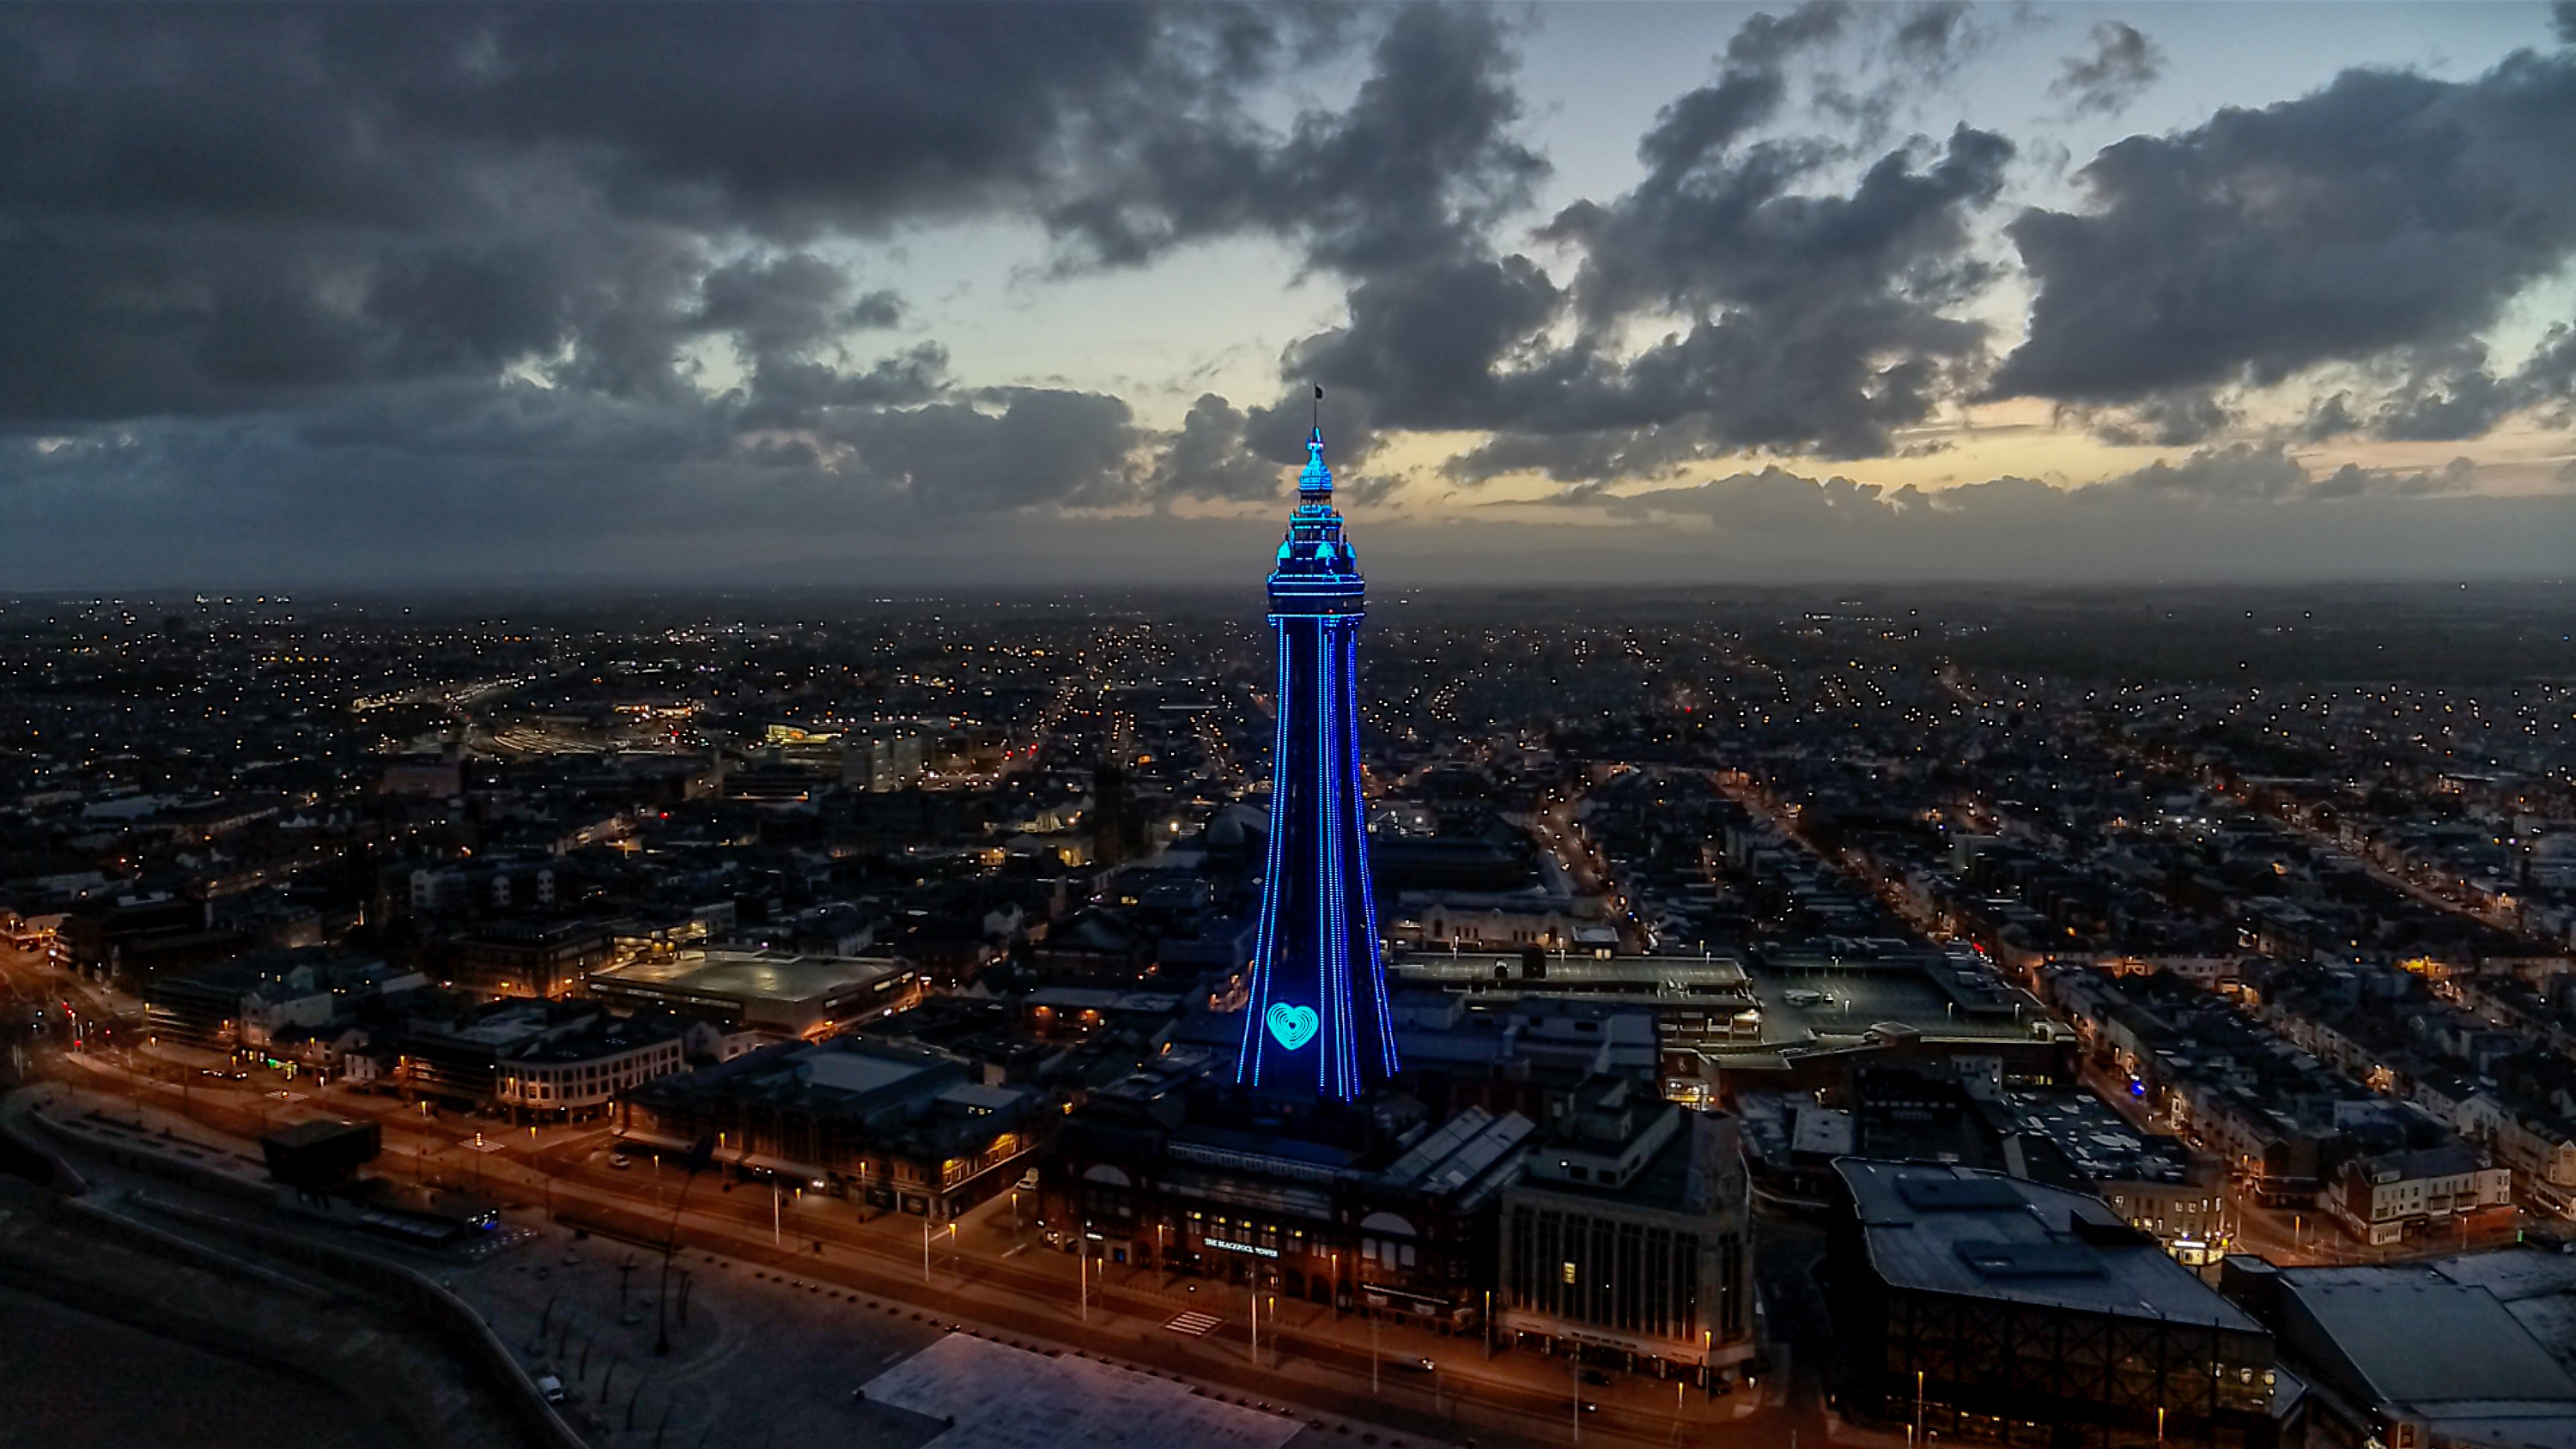 The Blackpool Tower Lit at night